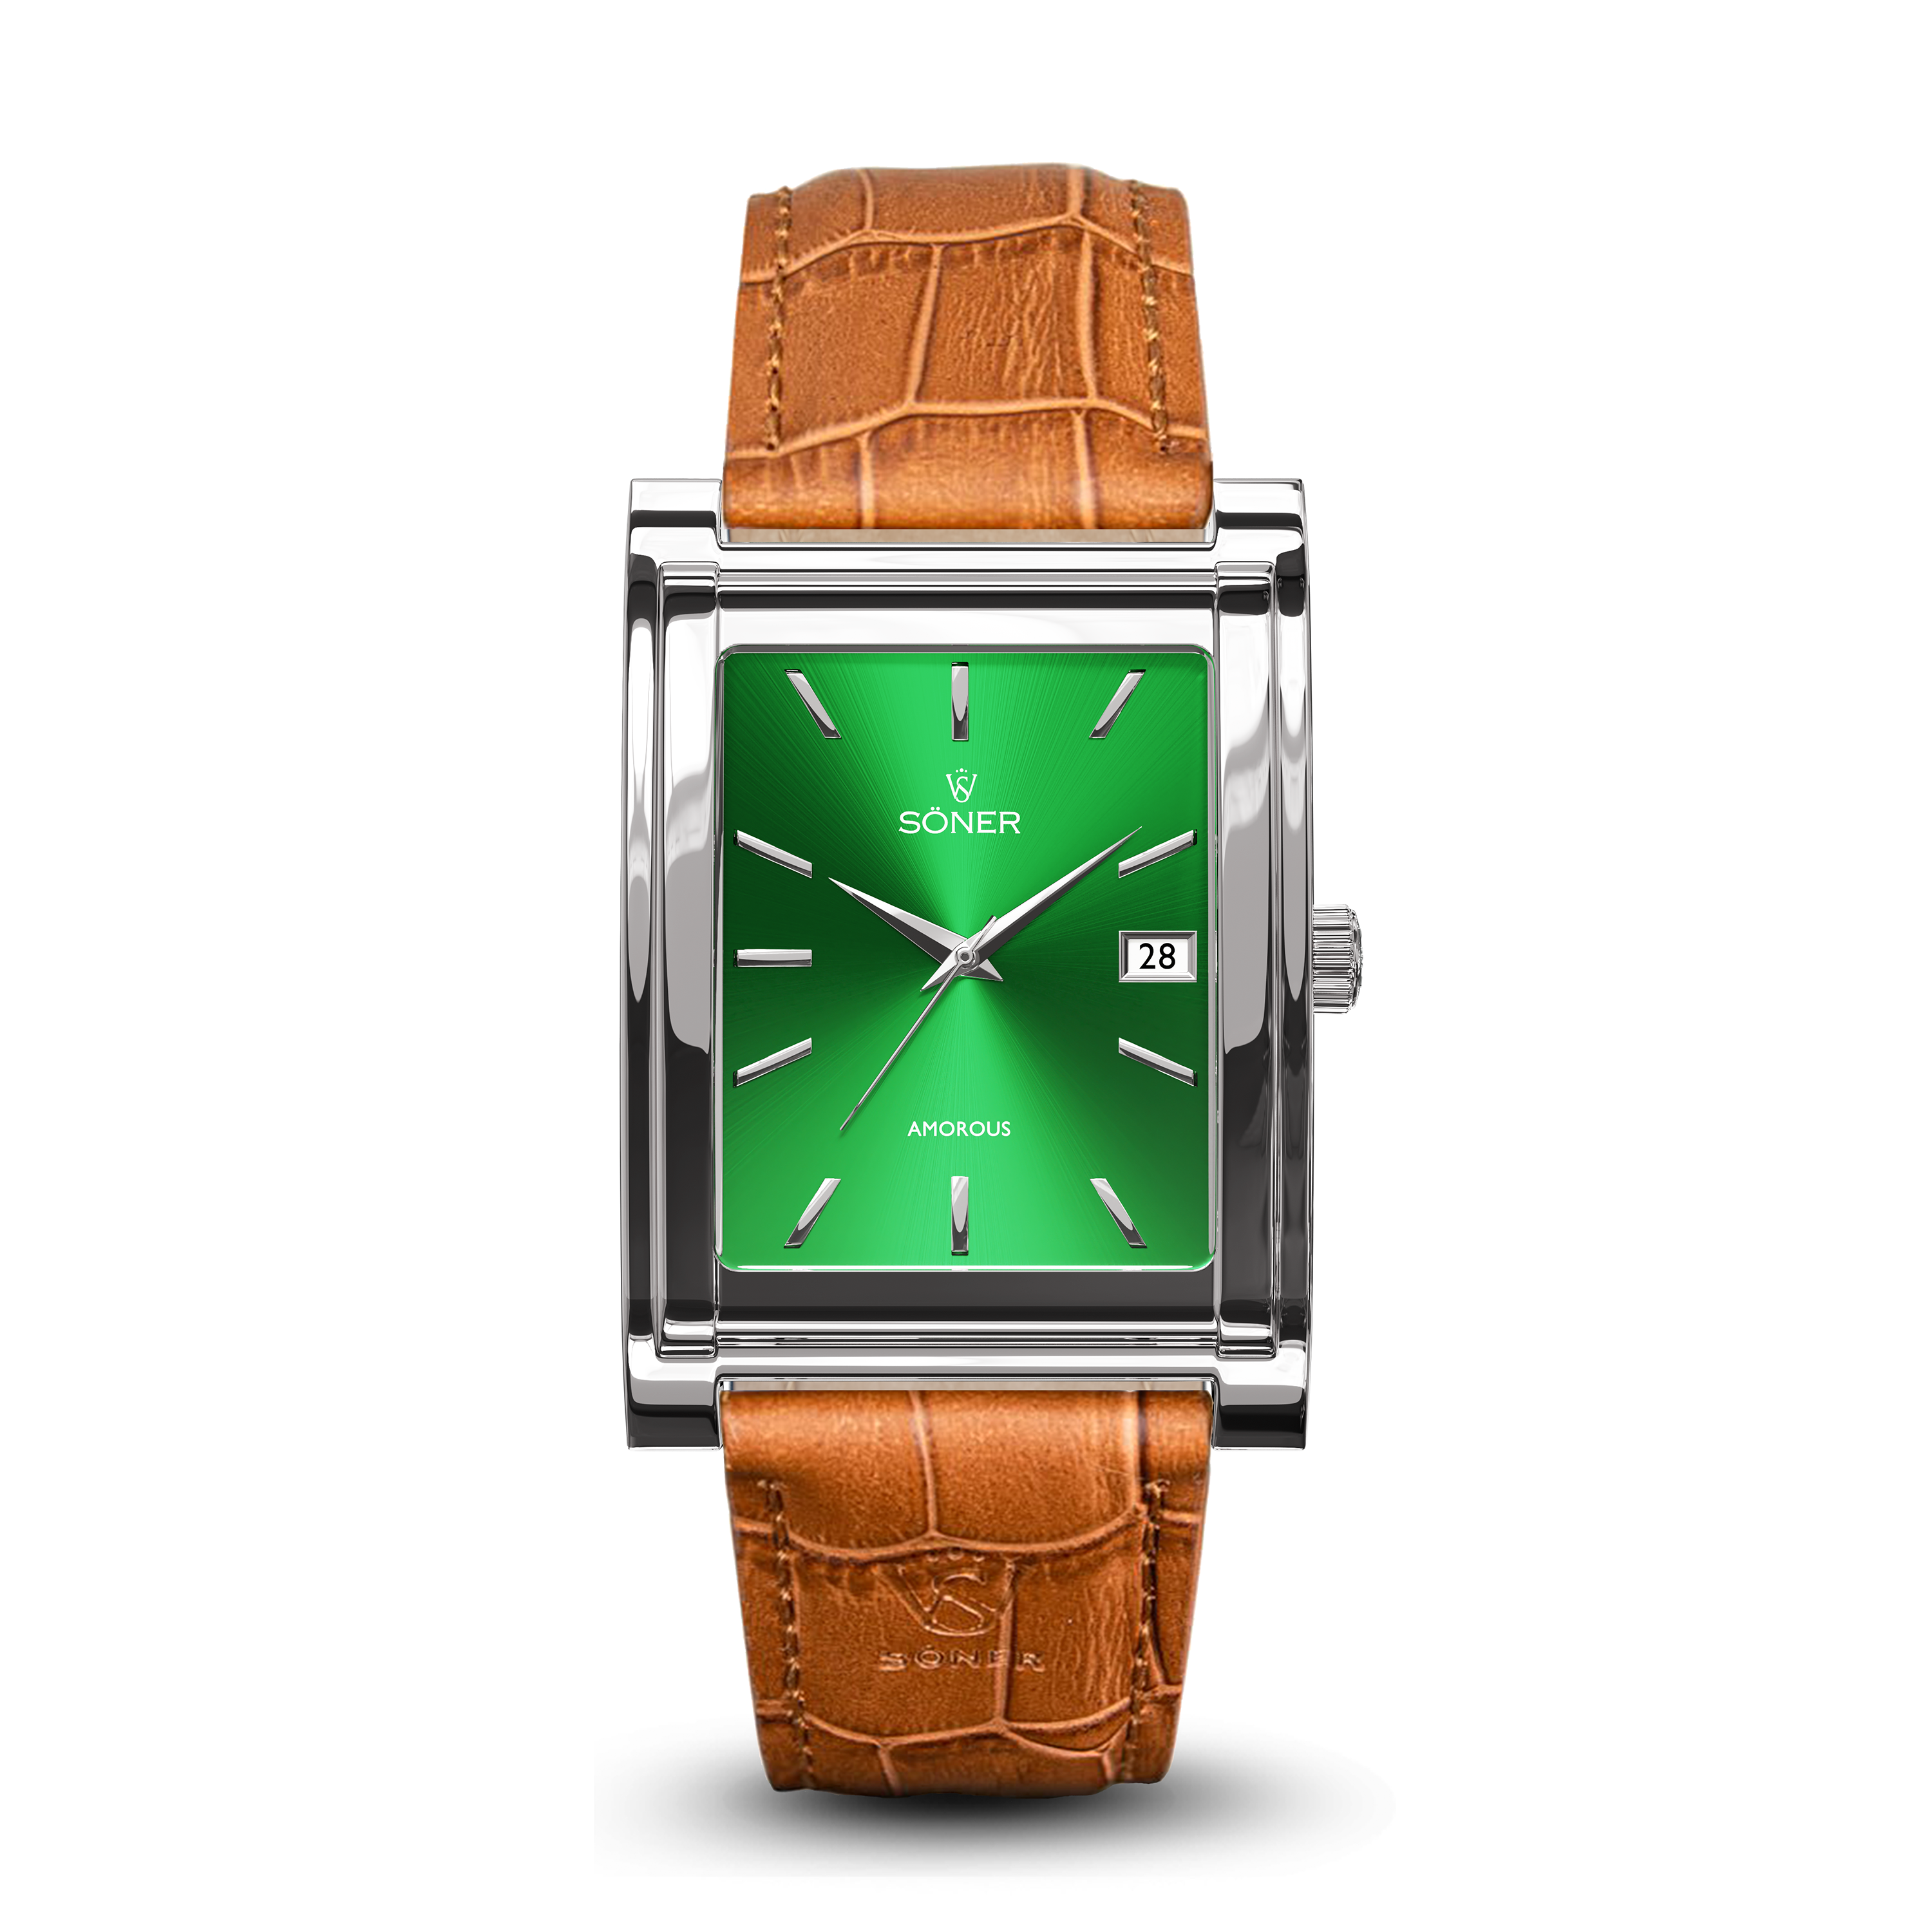 Square automatic watch, Amorous Tokyo with green dial - light brown alligator pattern leather strap front view